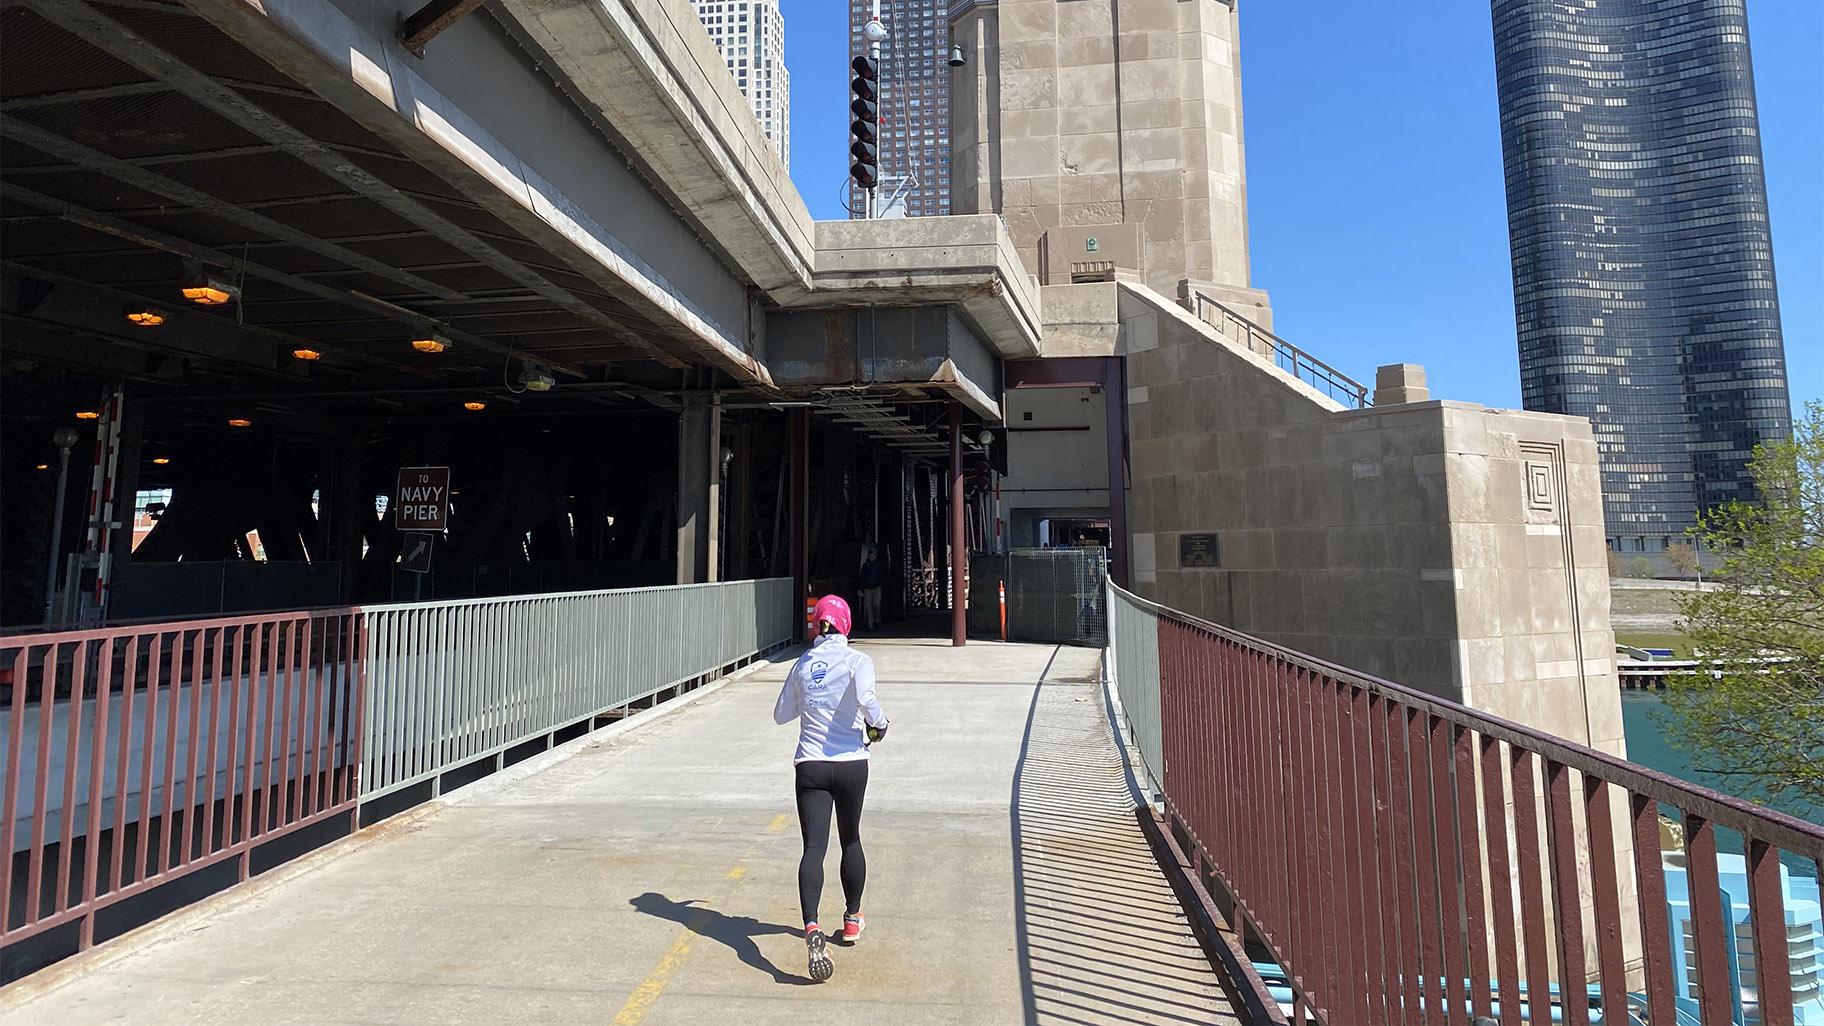 A runner approaches one of the Lake Shore Drive bridge houses on the nearly finished Navy Pier Flyover portion of the lakefront trail, April 30, 2021. (Nick Blumberg / WTTW News)